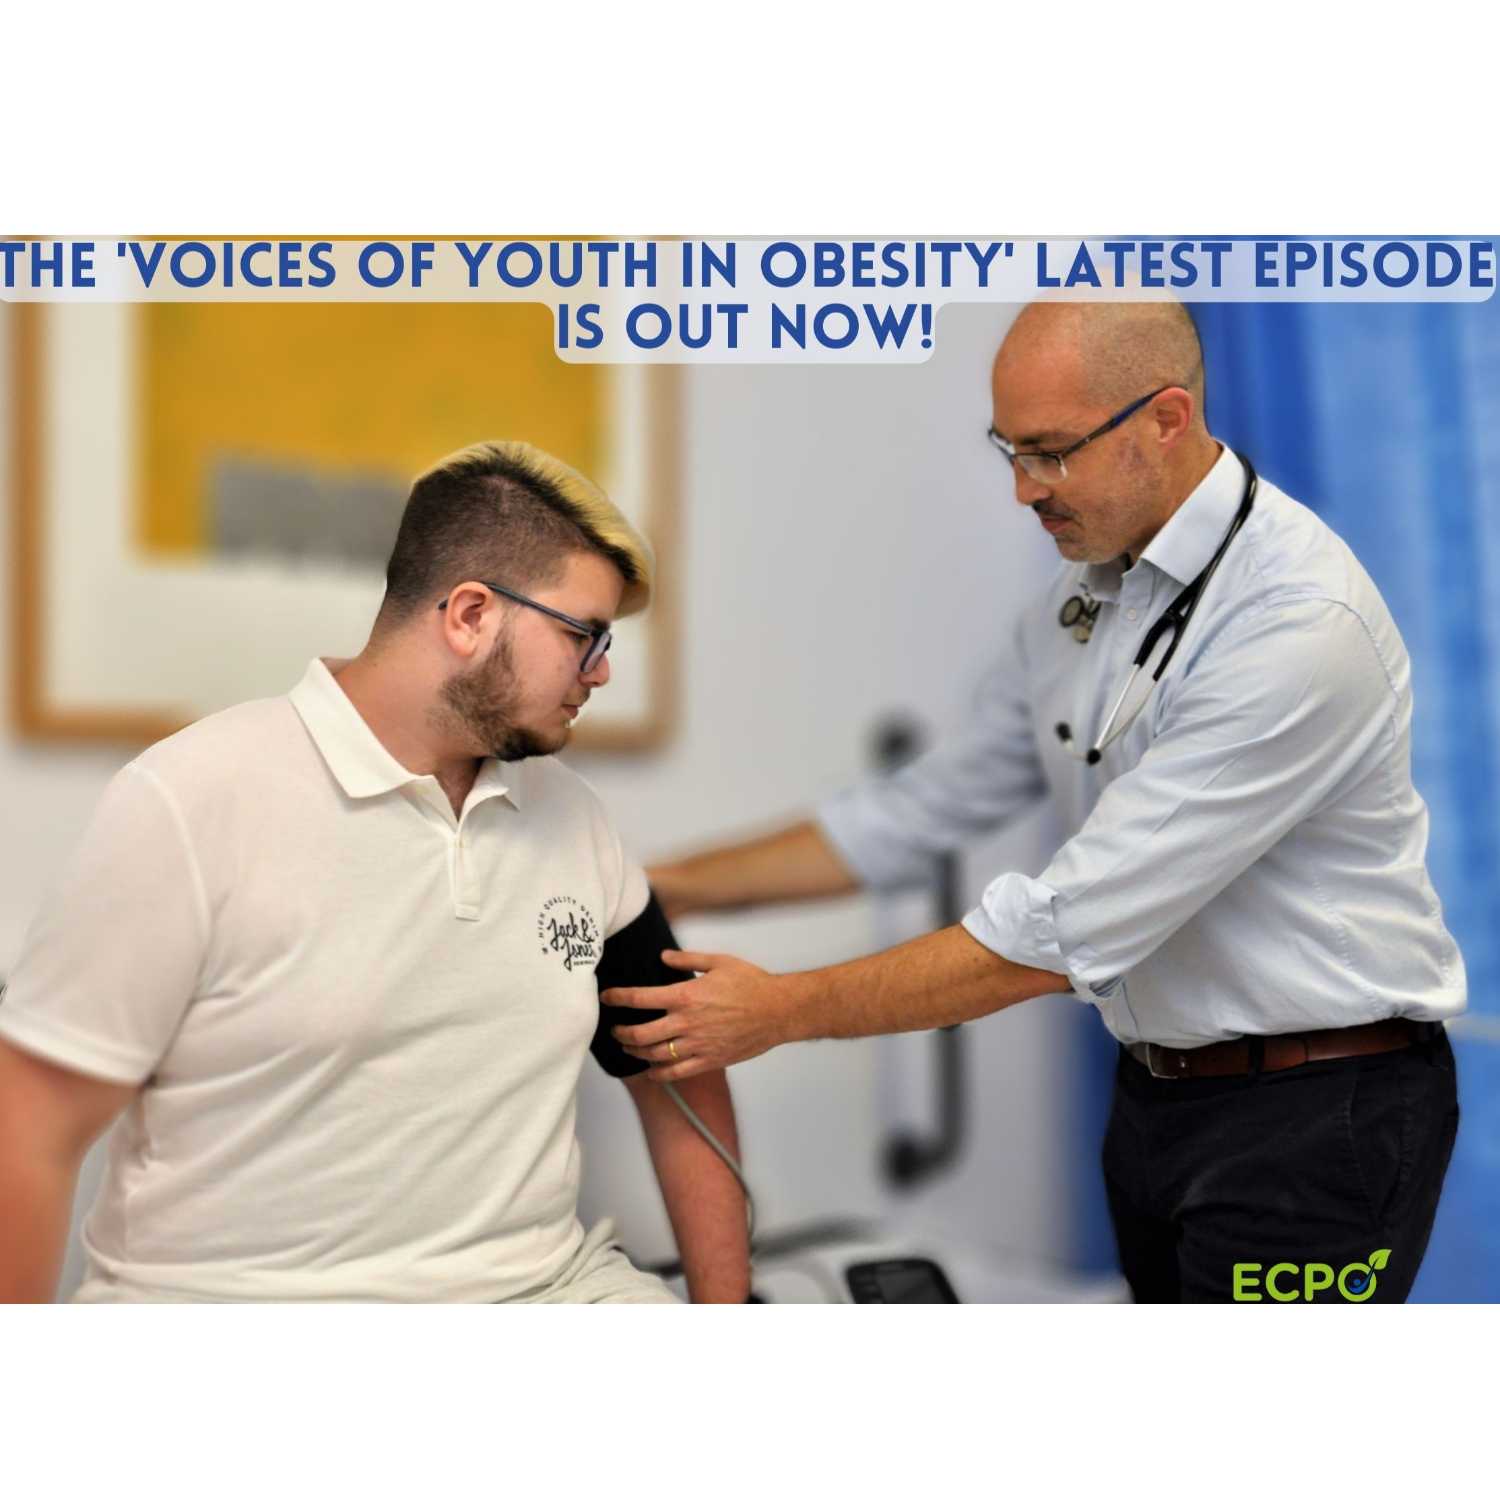 Breaking the silence on obesity in young adults, with Konstantin from Bulgaria, and Rhys from England.